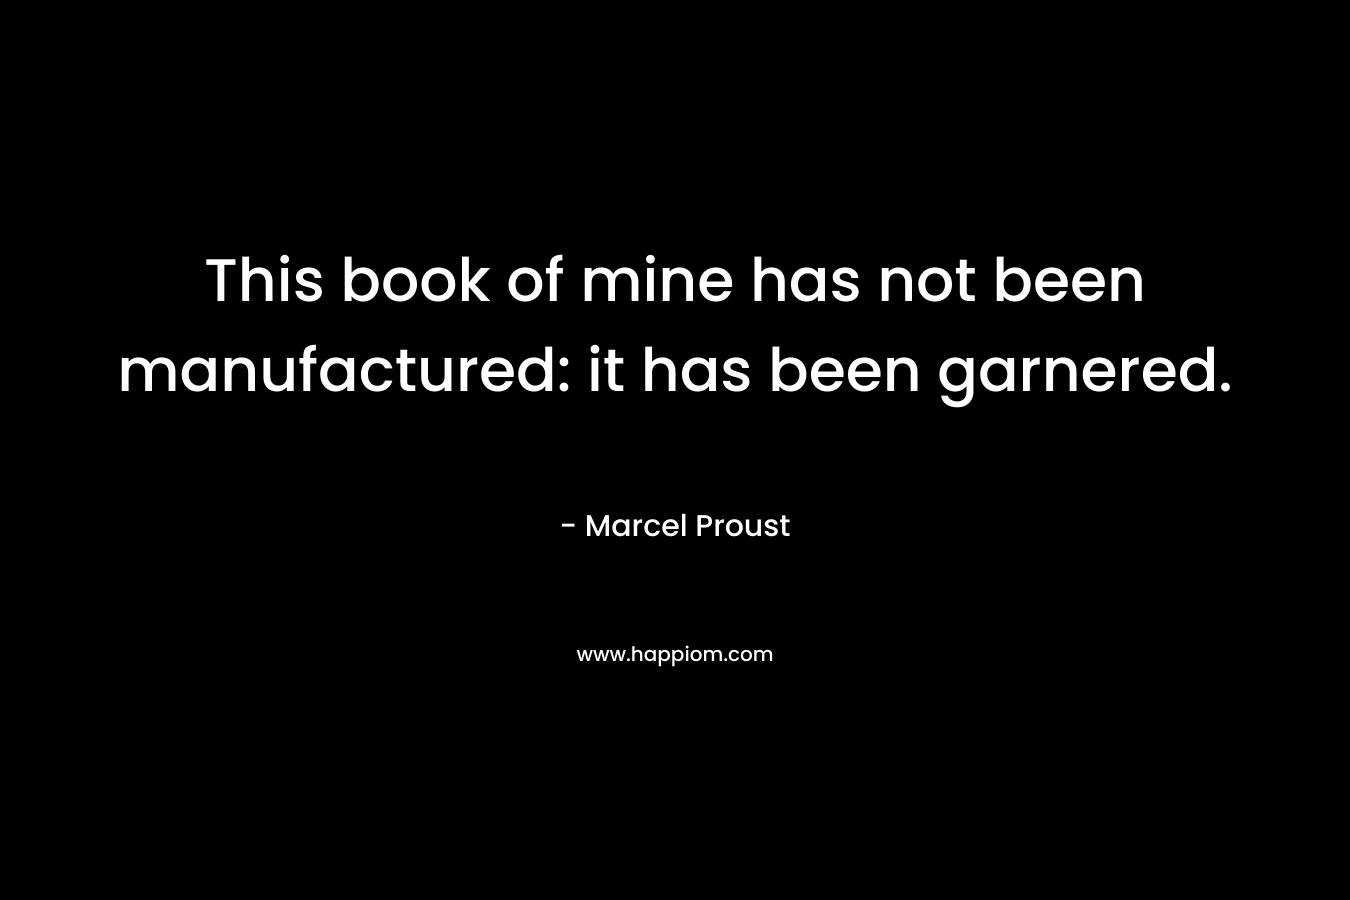 This book of mine has not been manufactured: it has been garnered. – Marcel Proust